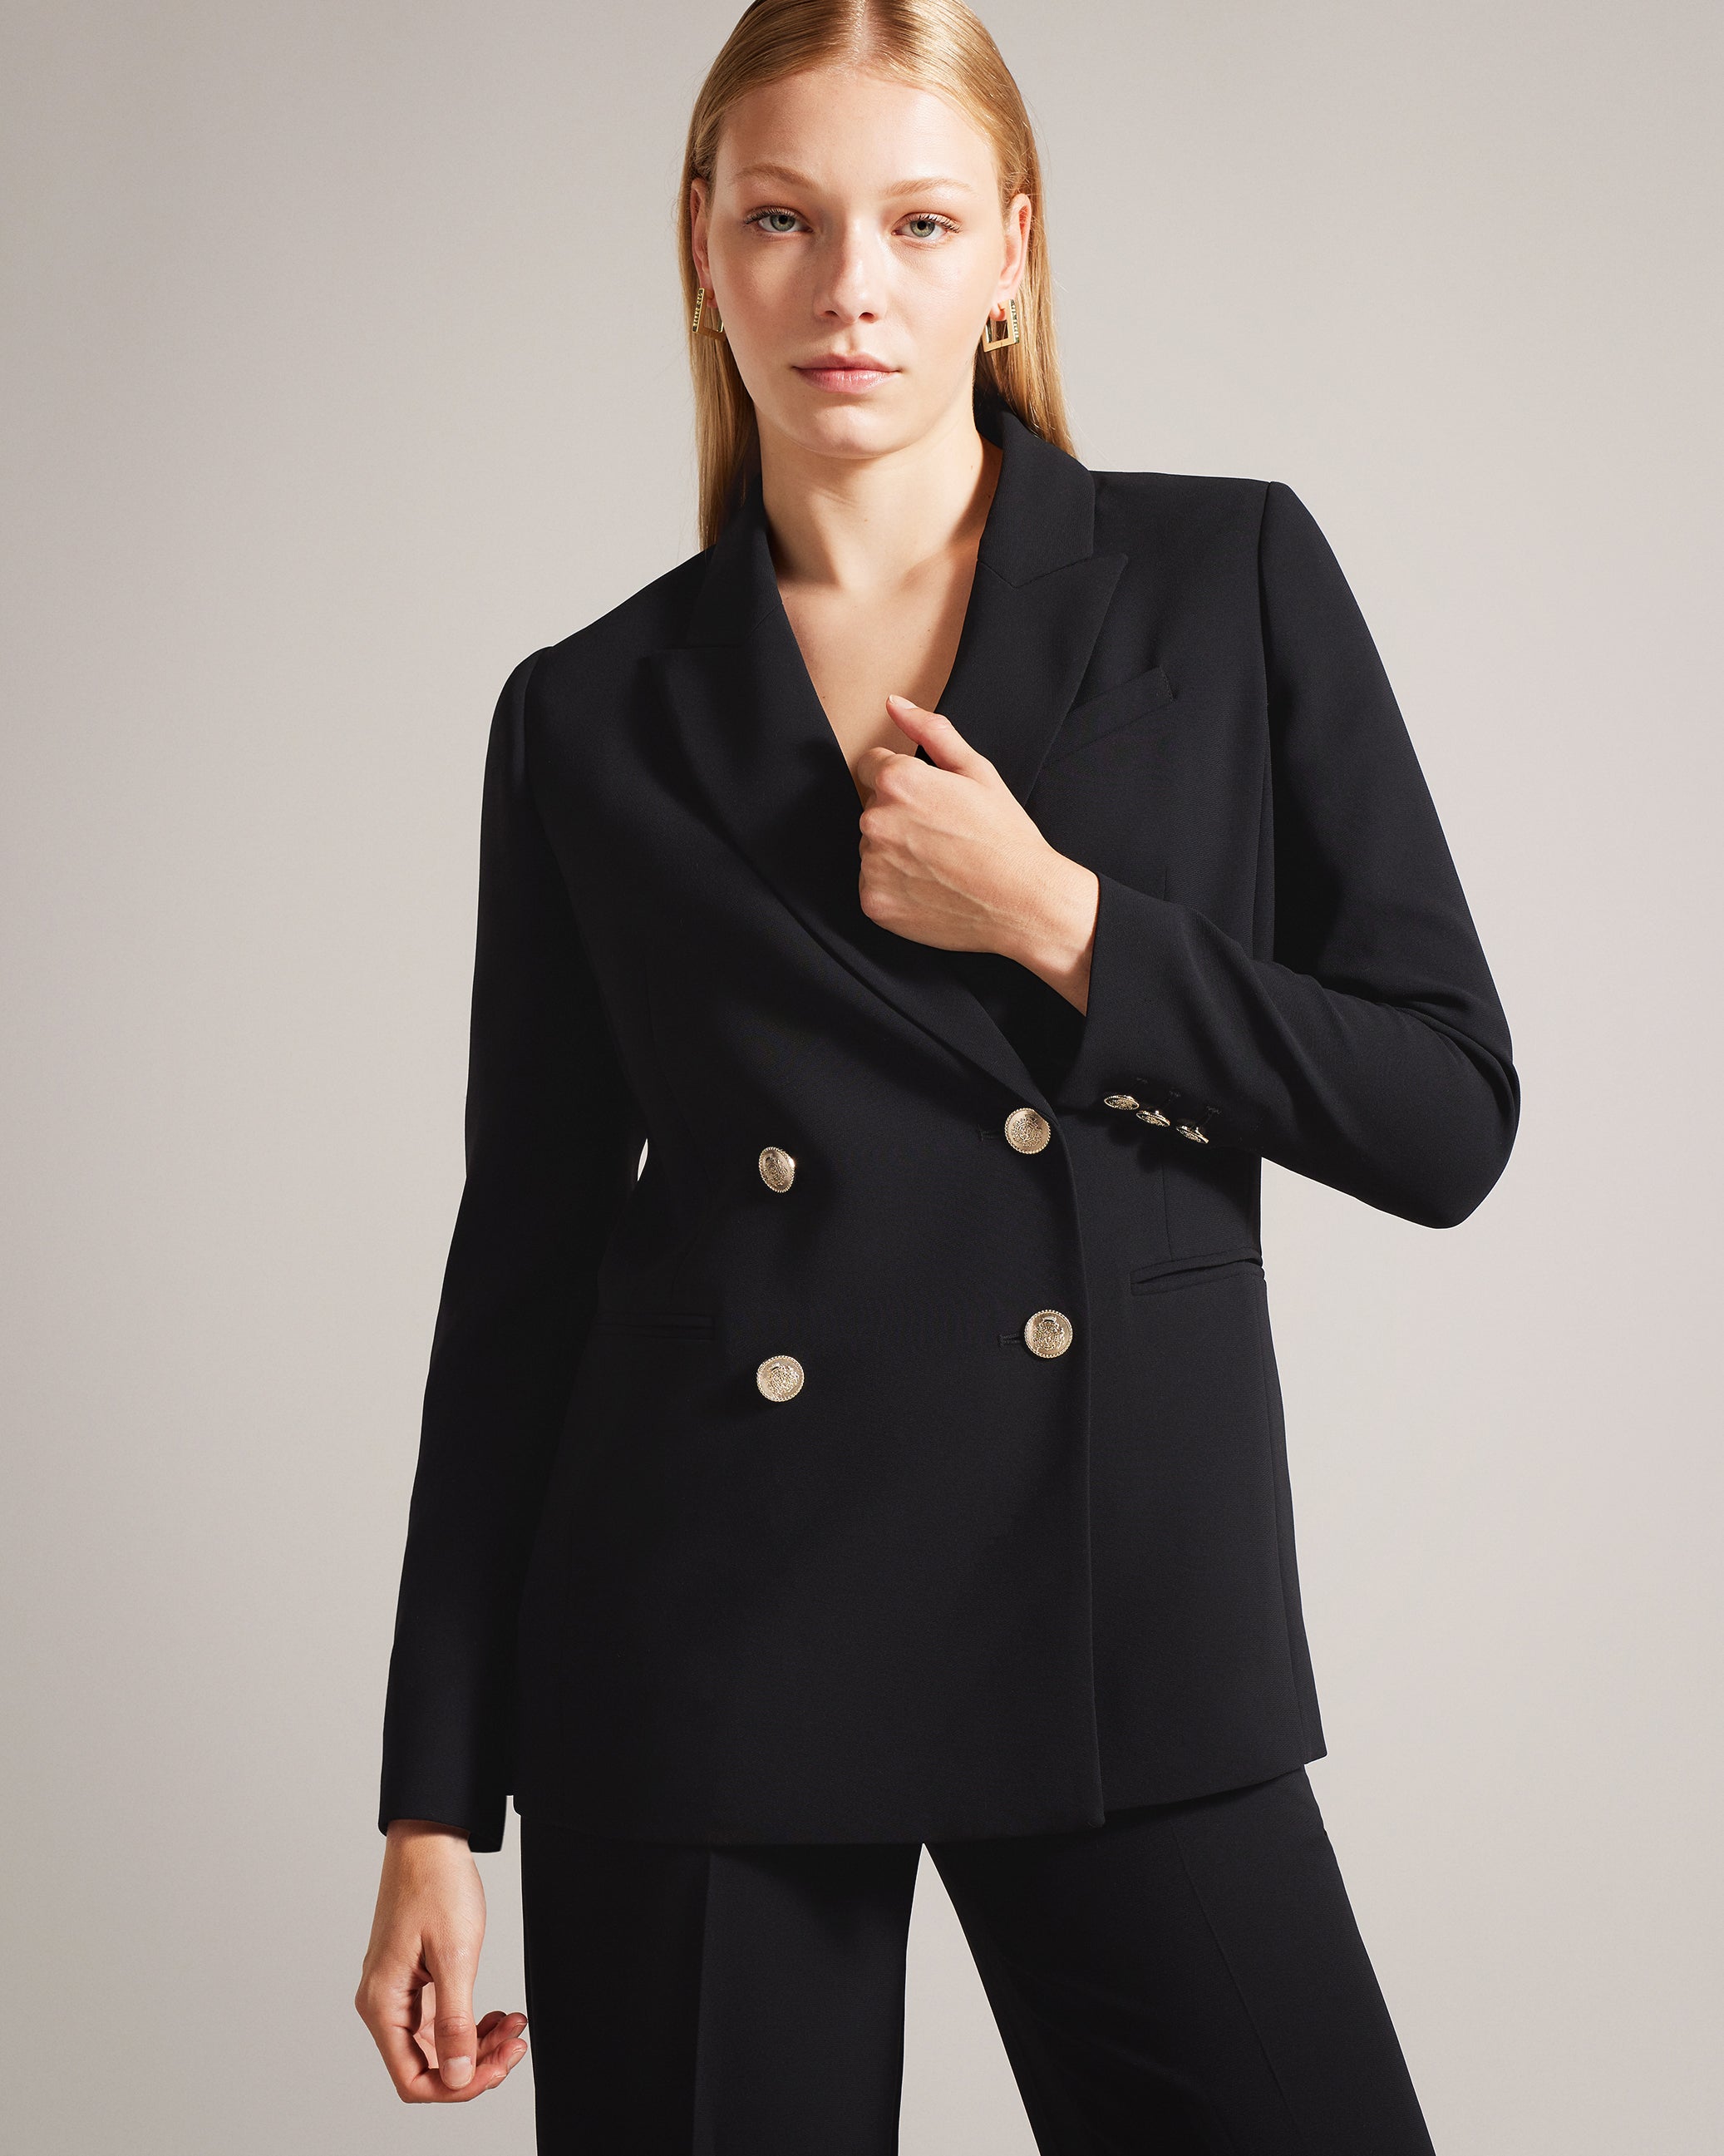 Women's Suits & Co-ords – Ted Baker, Canada